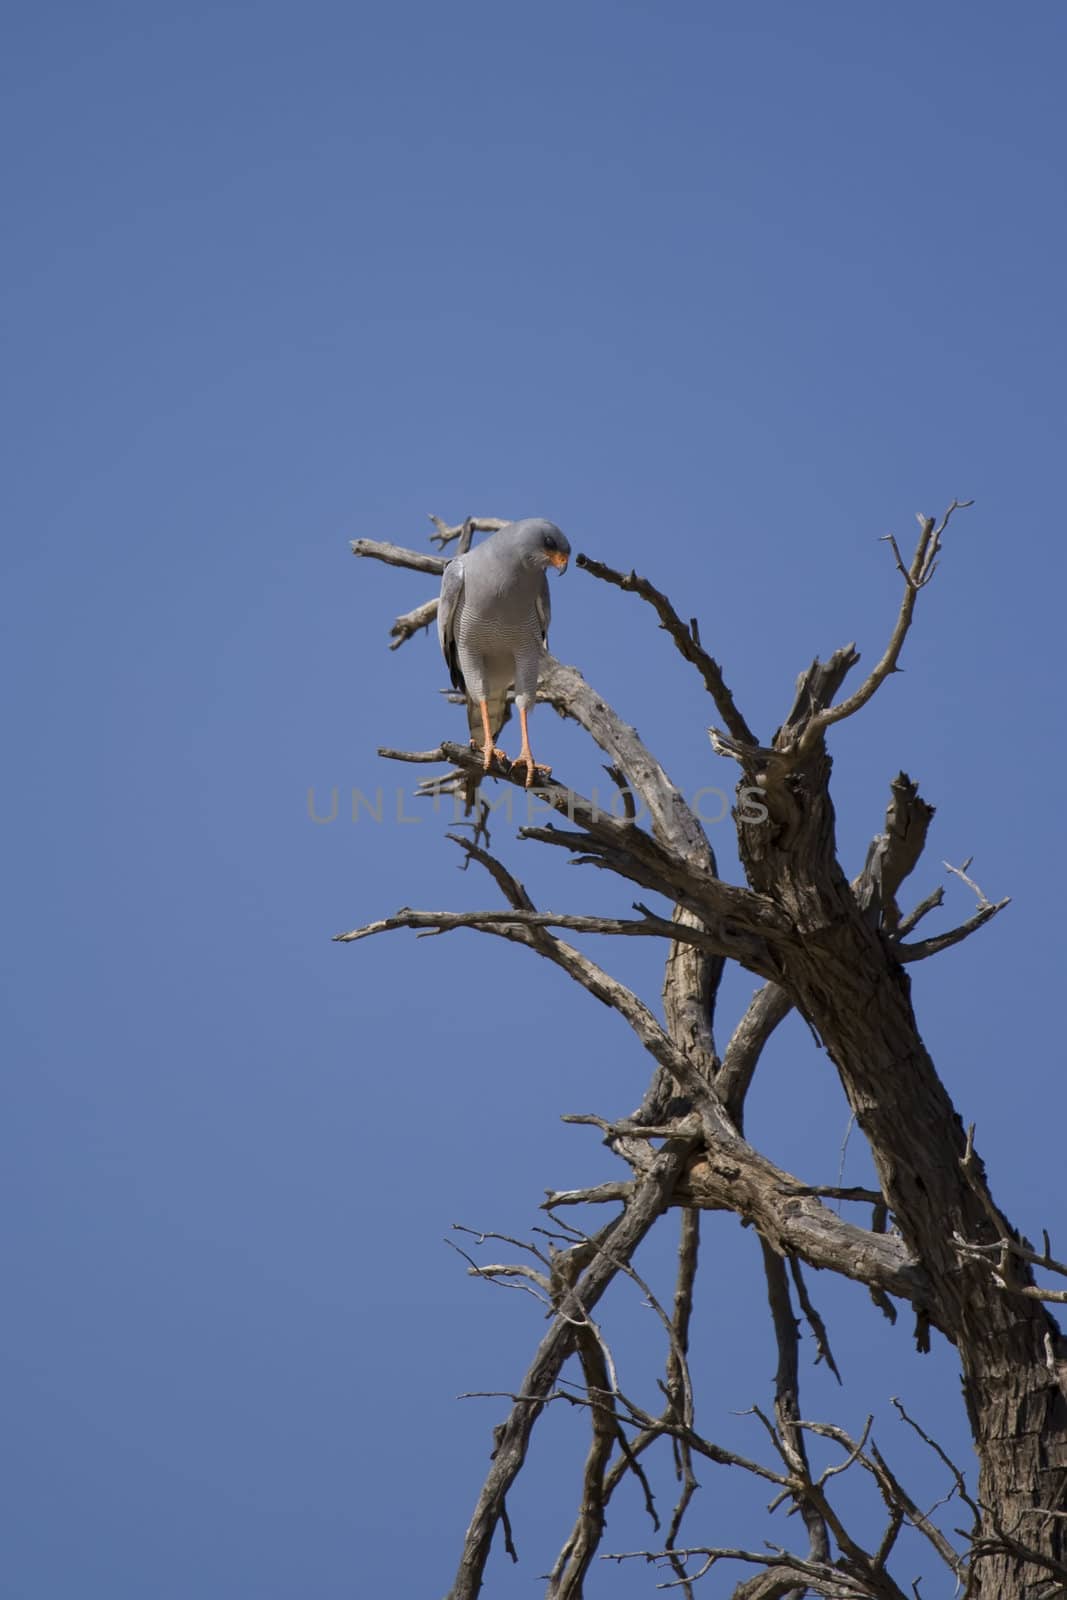 Pale chanting goshawk searching for prey from the perch of a dead tree